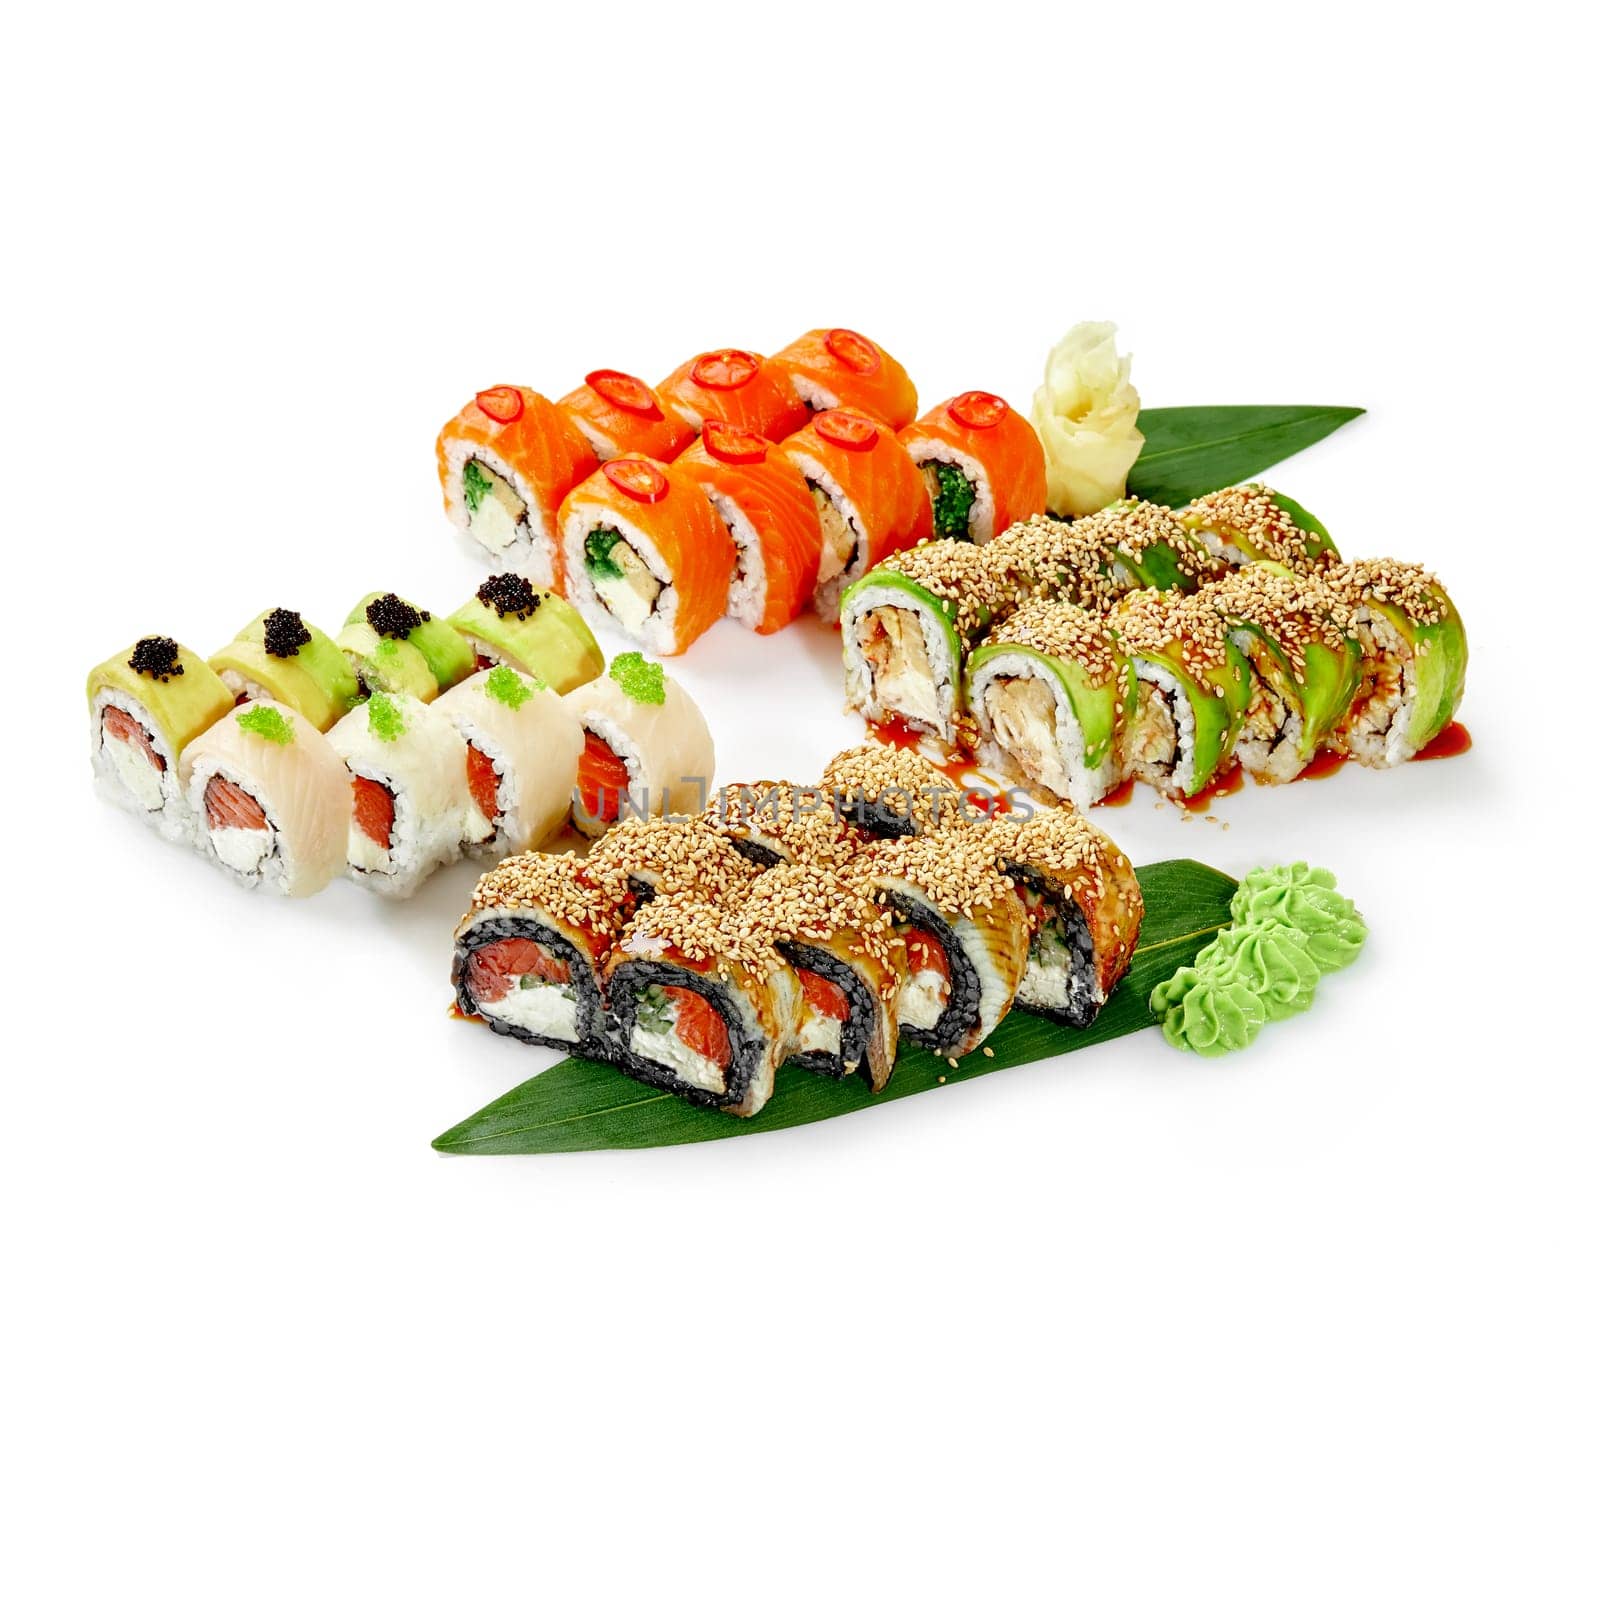 Elegant colorful assortment of Japanese sushi rolls with salmon, eel and perch, topped with sesame seeds and tobiko, presented on bamboo leaves garnished with wasabi and pickled ginger